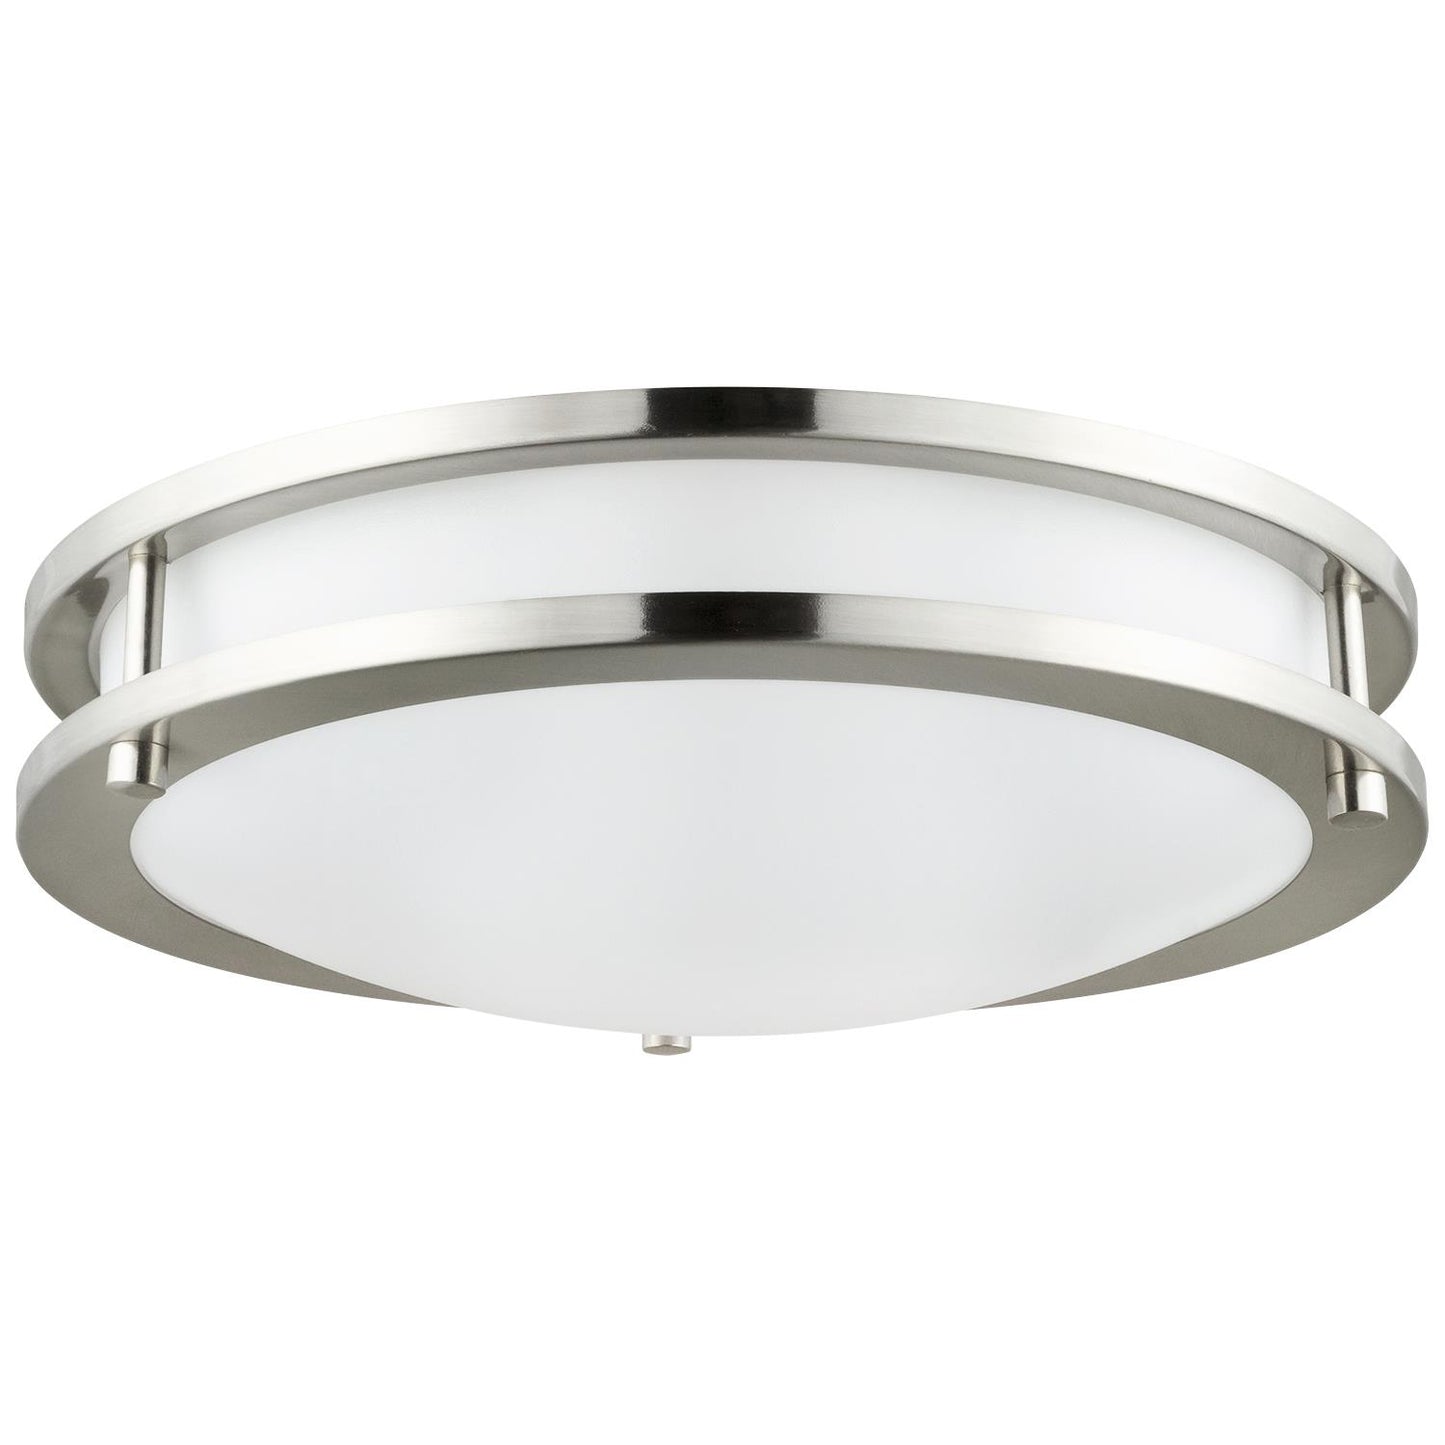 Sunlite 88316-SU LED Flush Mount Double Band Ceiling Fixture, 17 Watt, Dimmable, Brushed Nickel Finish, 12-Inch 50K - Super White